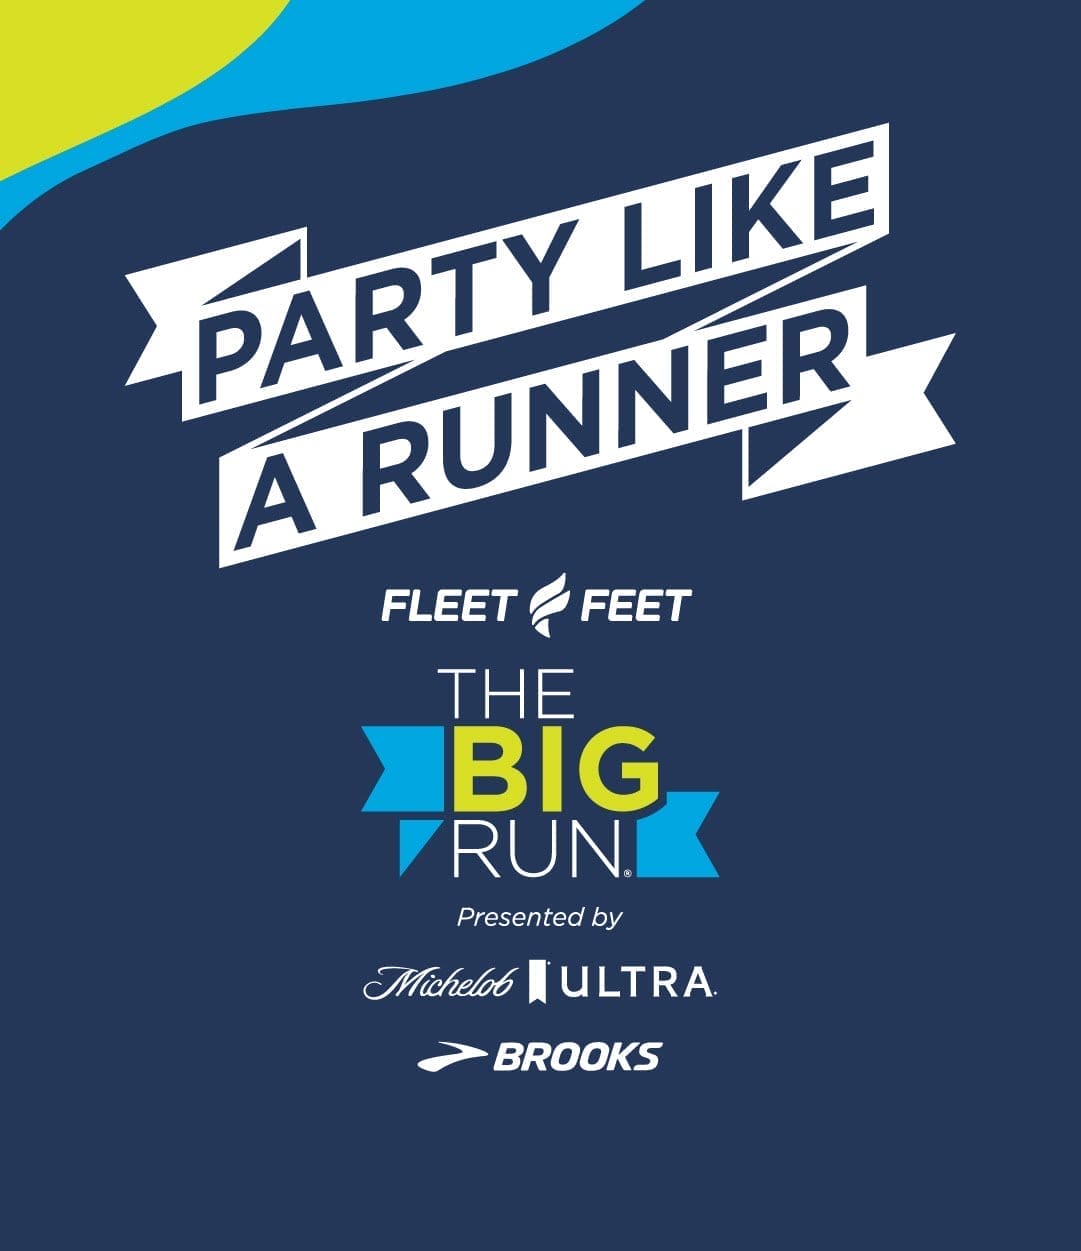 Party like a runner